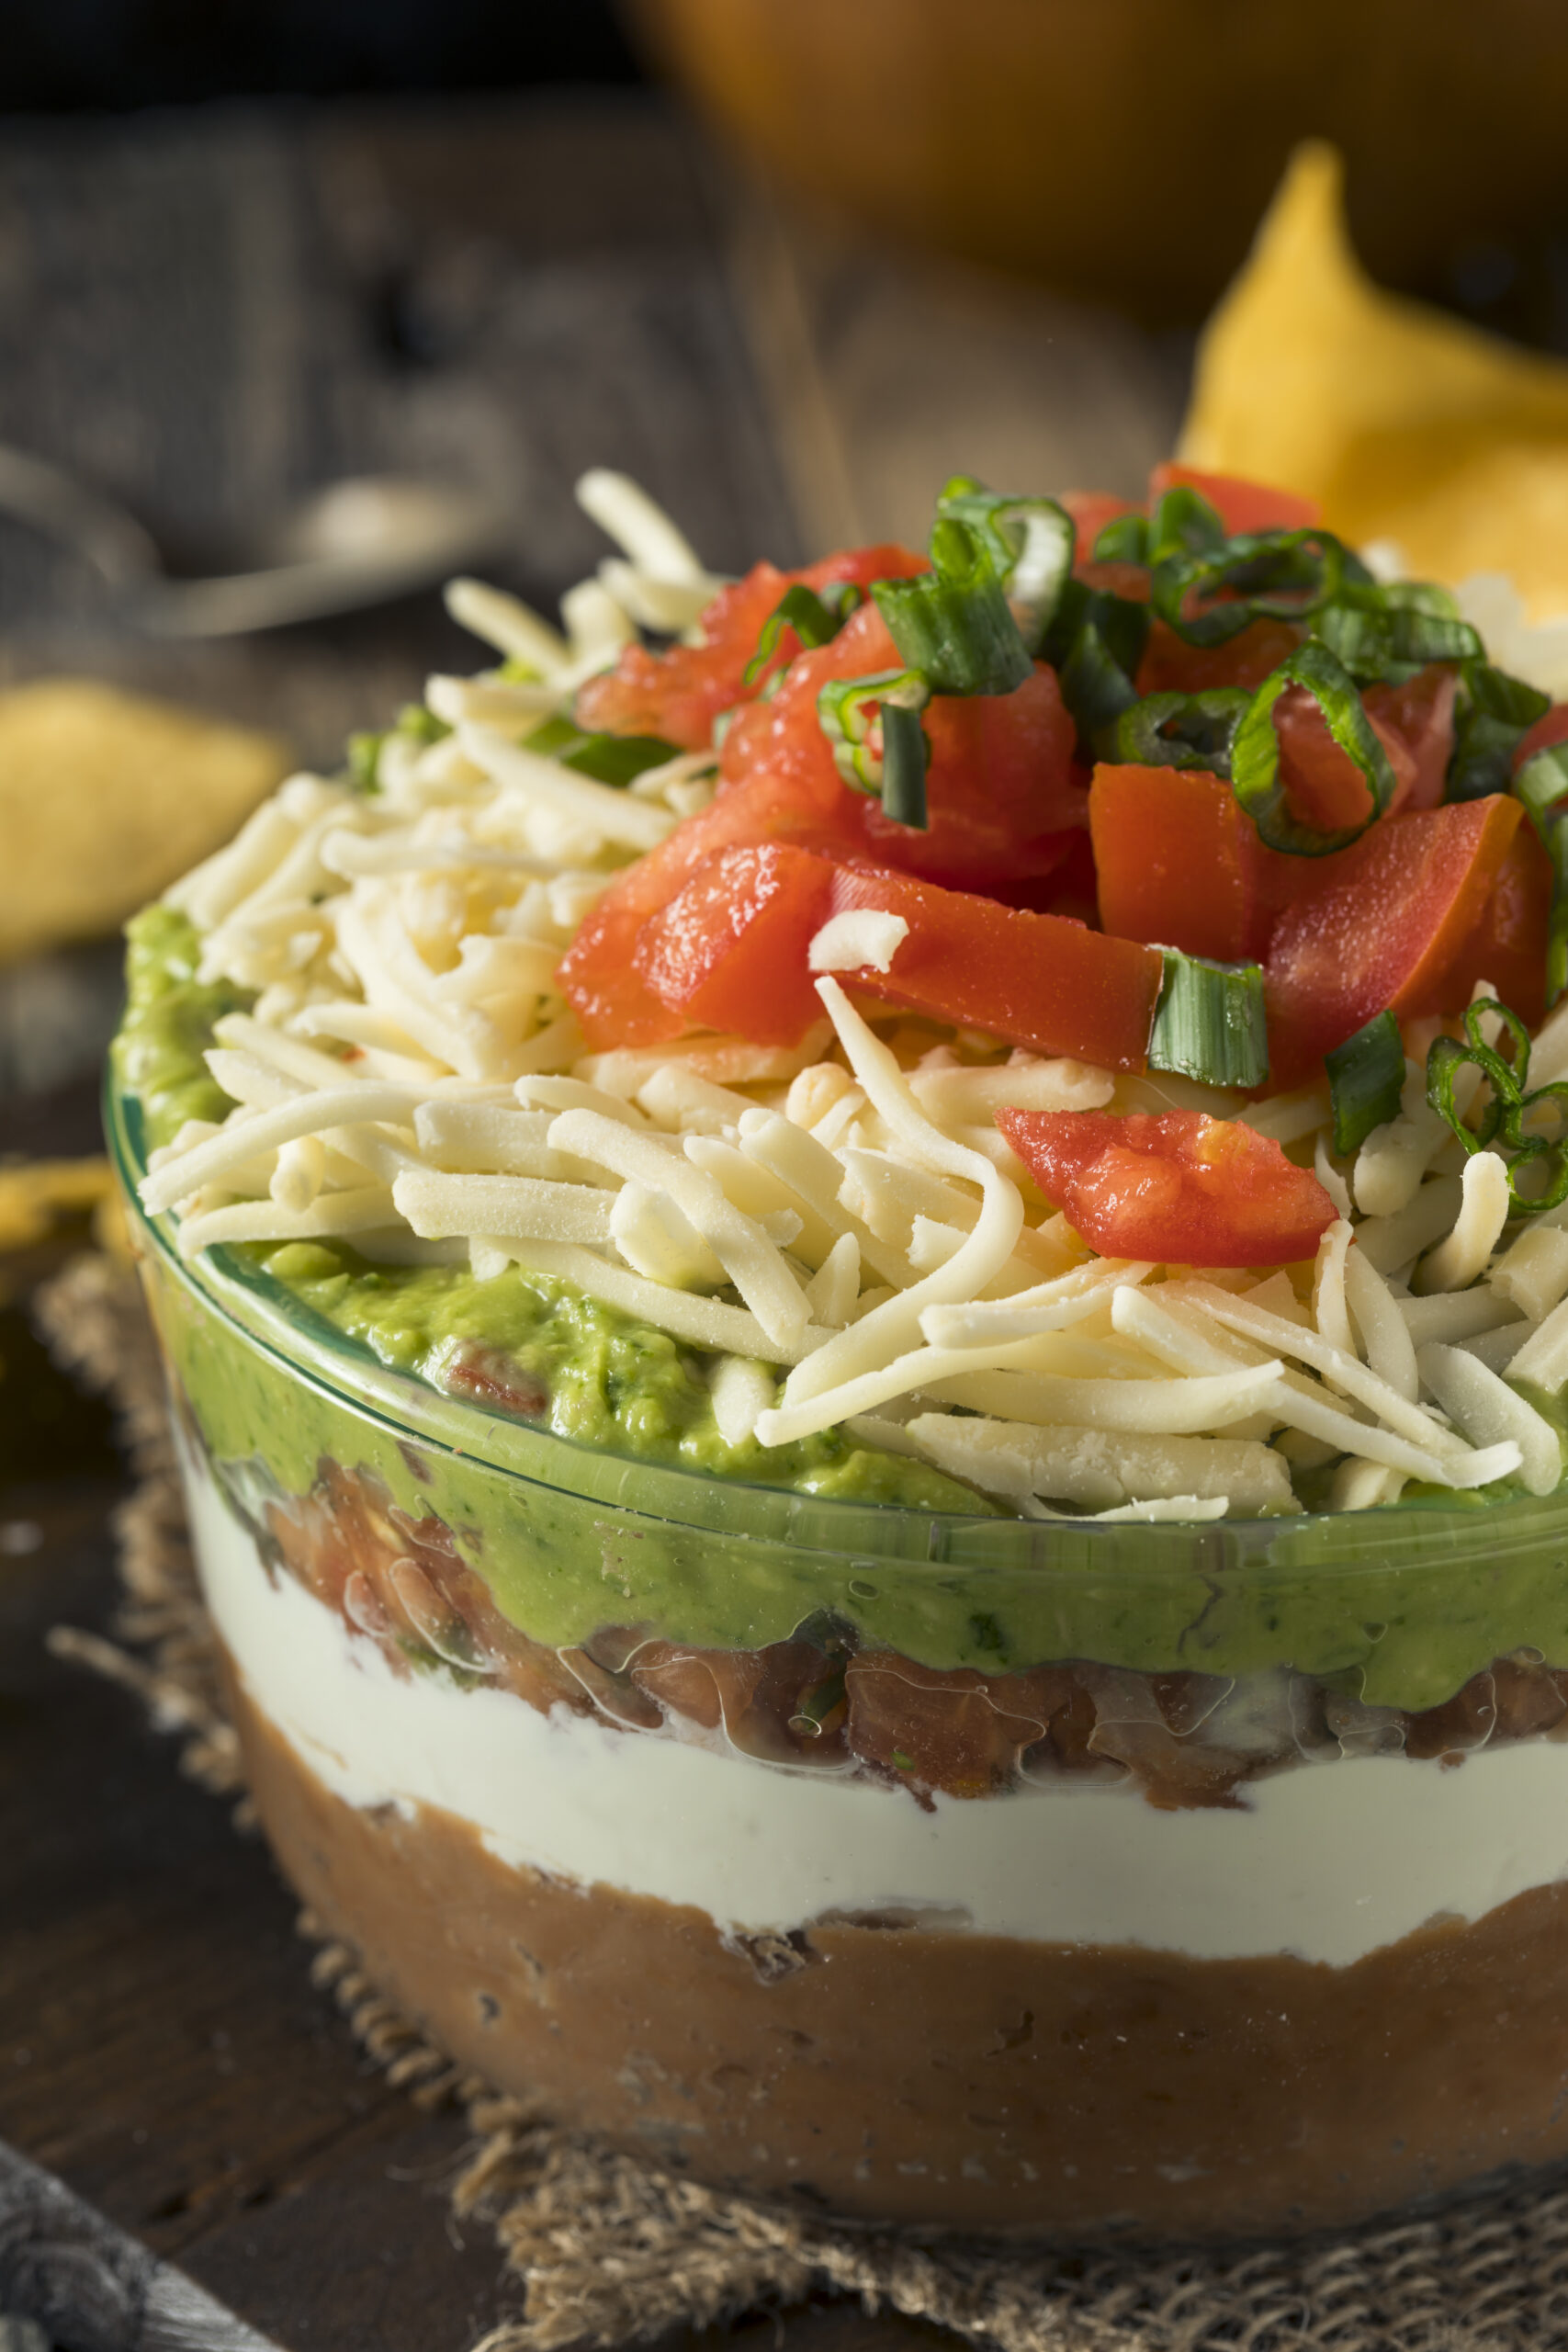 7-Layered Mexican Dip Appetizer; refried beans mixture, sour cream, salsa, guacamole, cheese, tomatoes, and green onions!